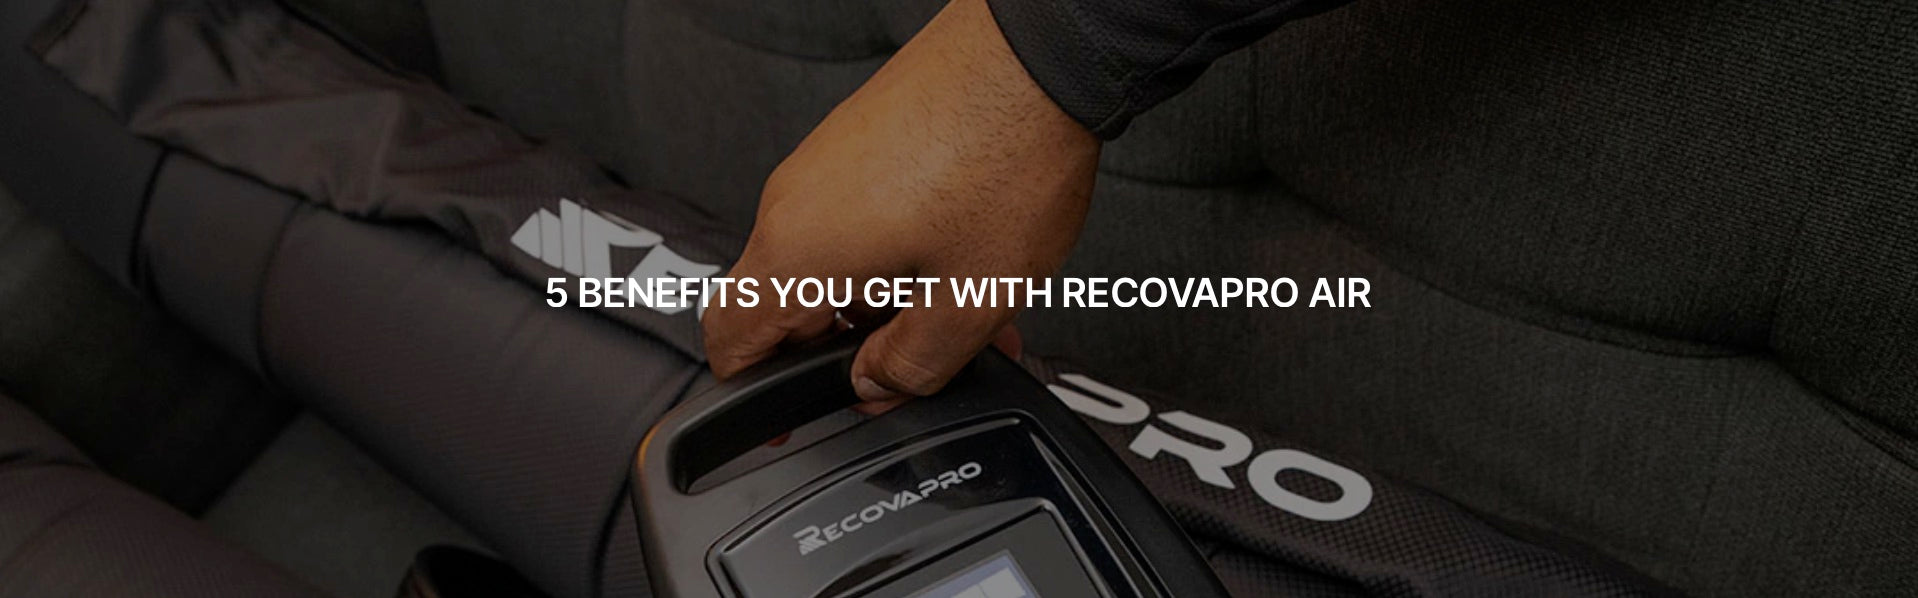 5 BENEFITS YOU GET WITH RECOVAPRO AIR